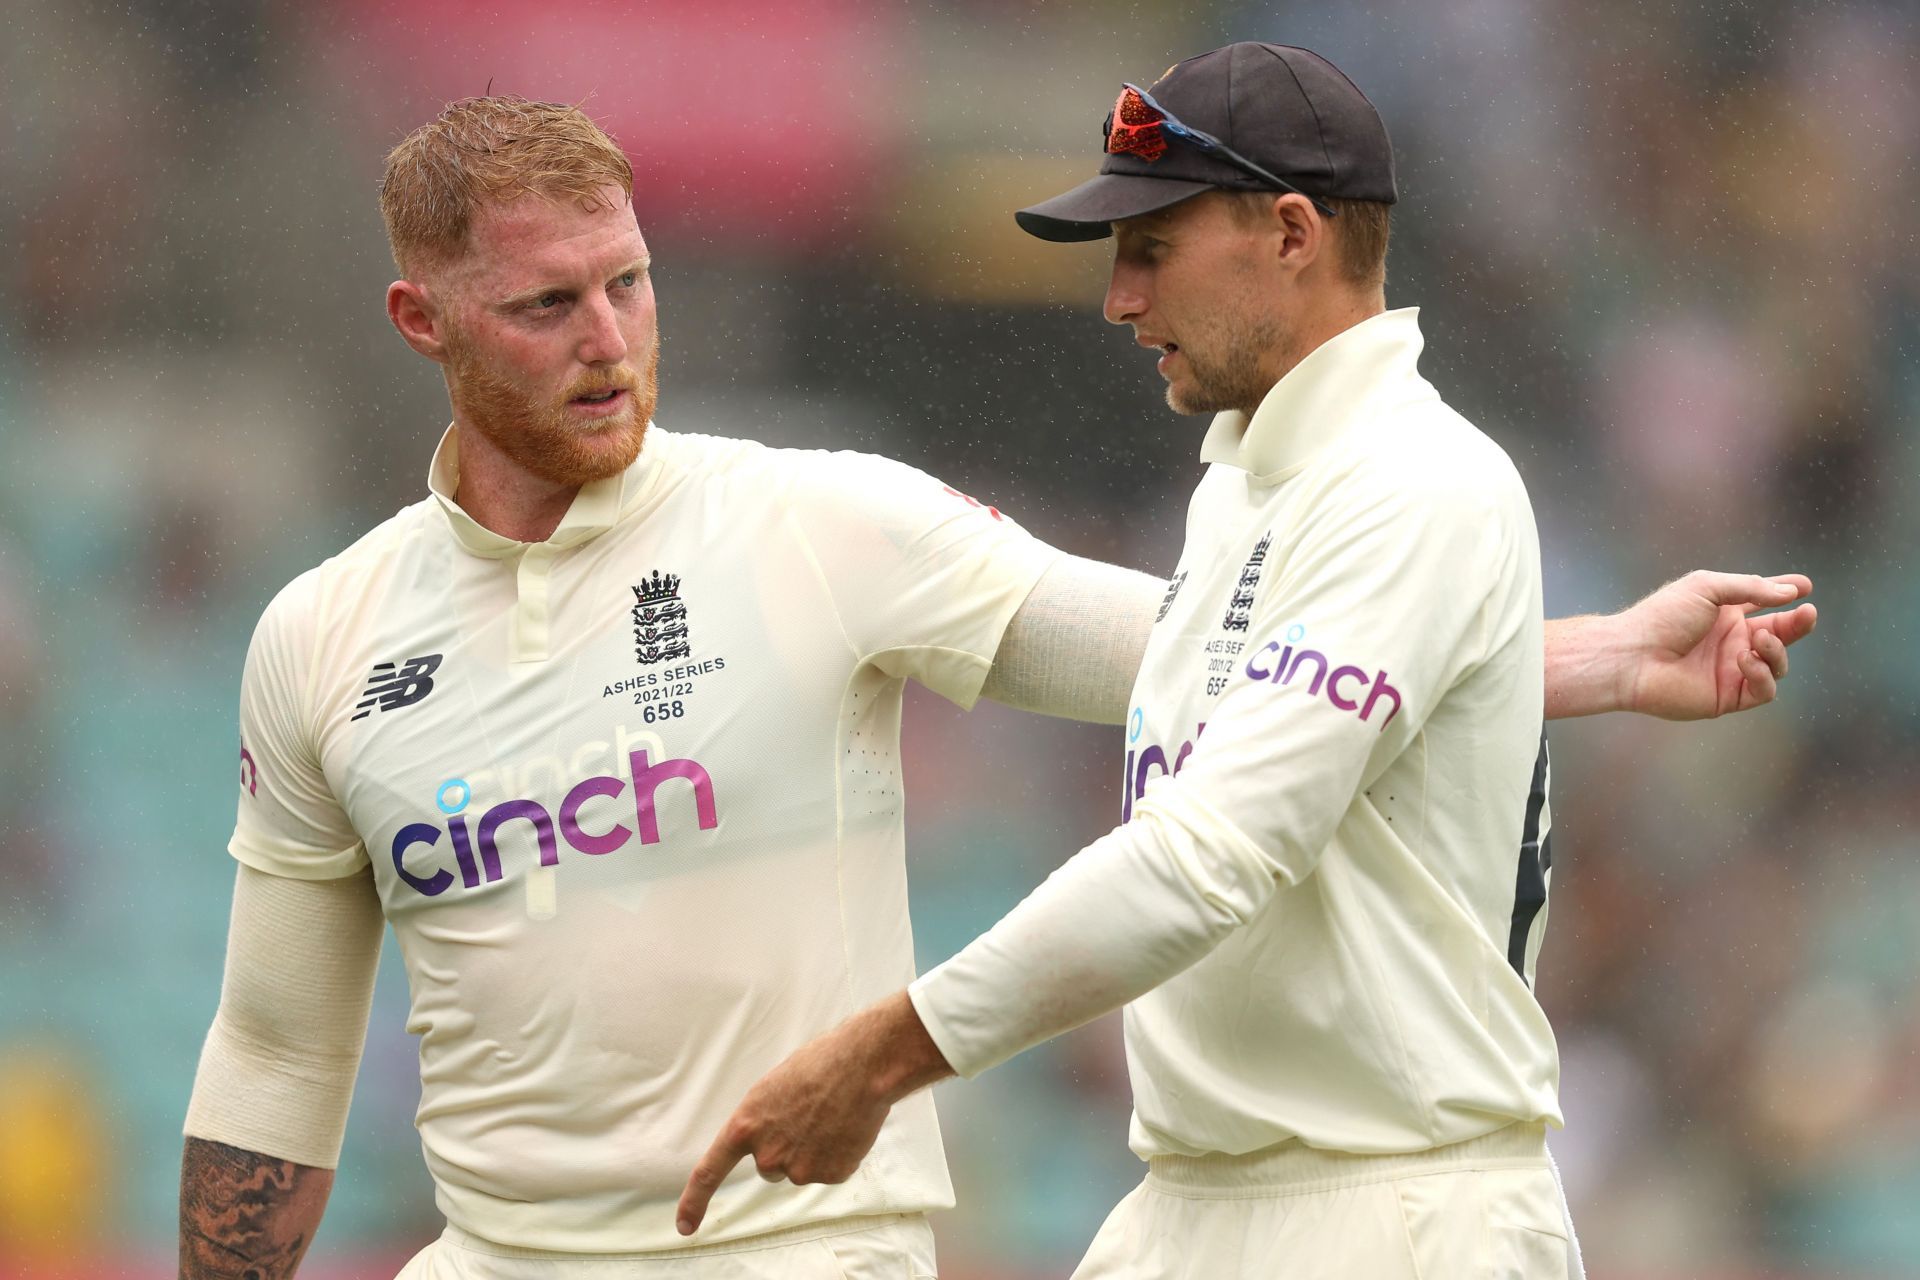 Ben Stokes has been viewed by many as the next England captain